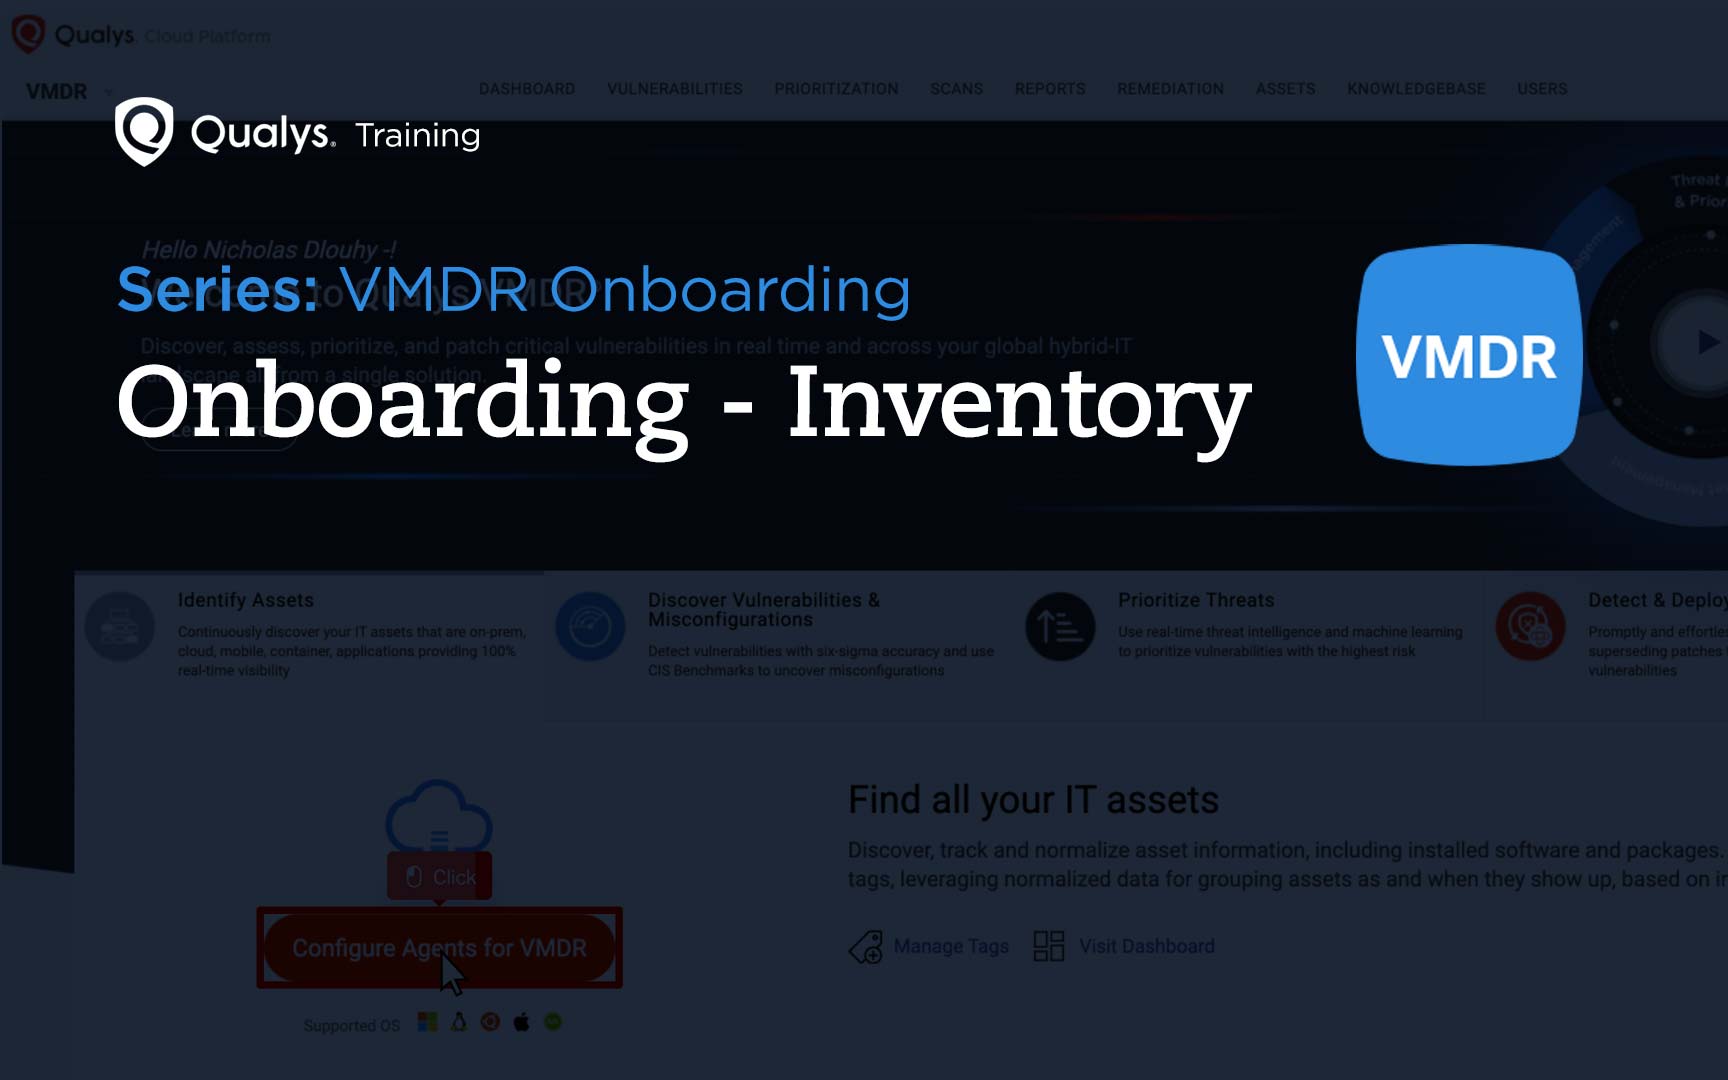 Onboarding - Inventory